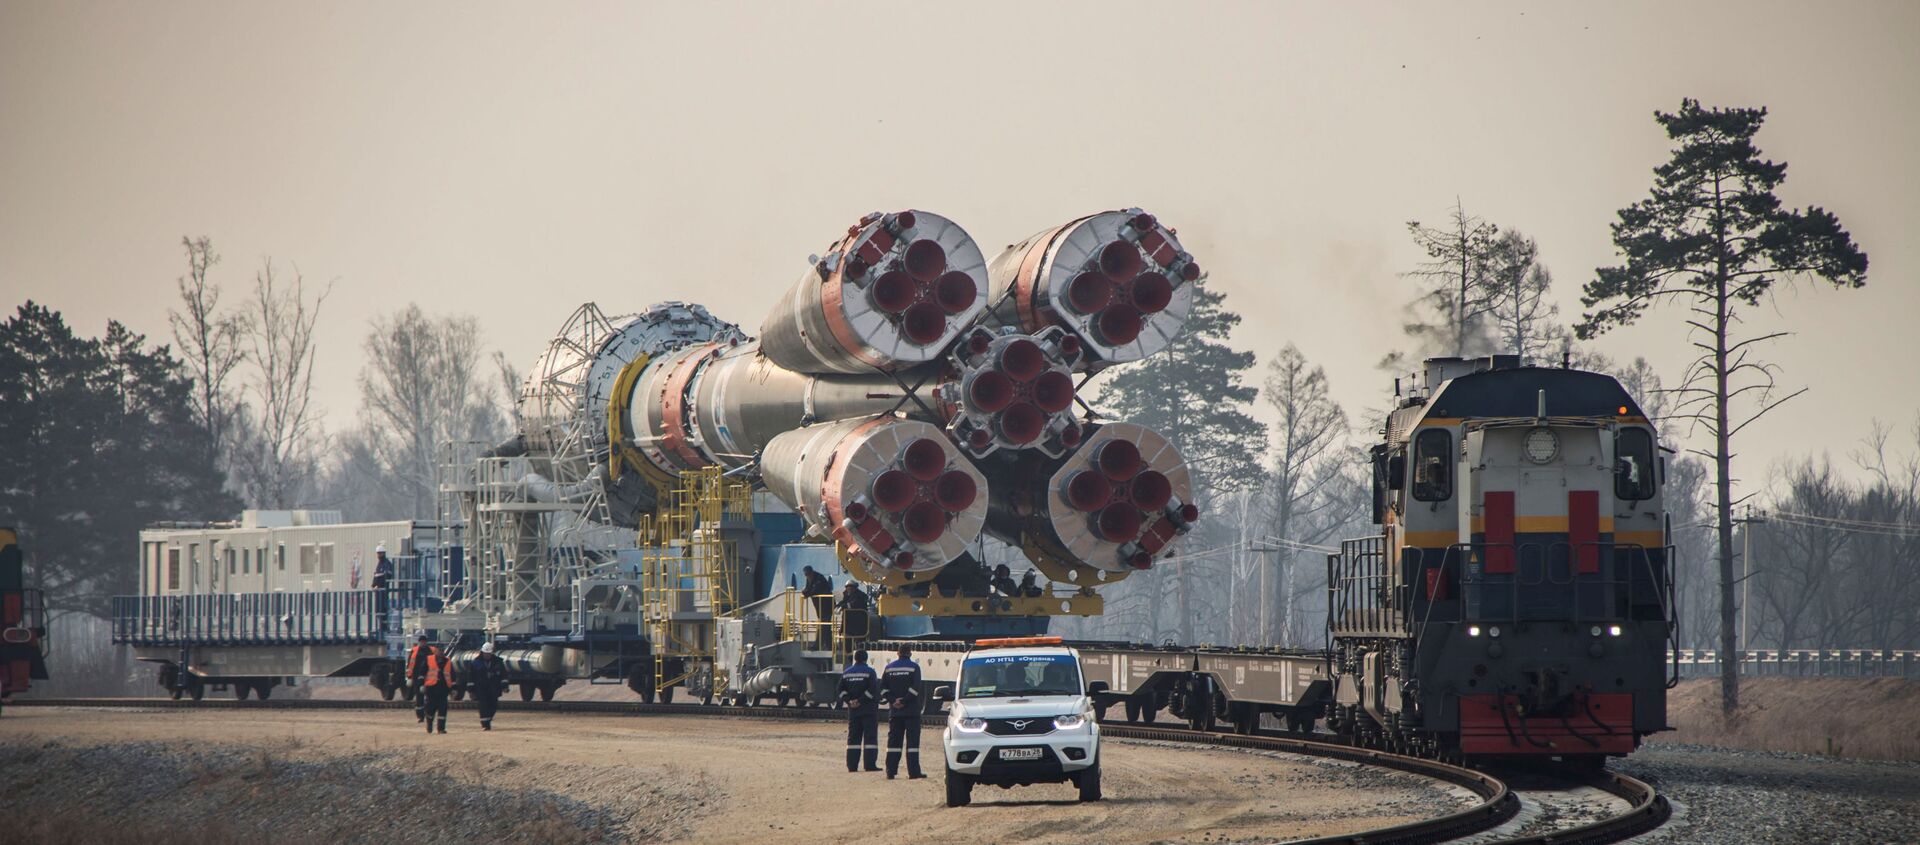 A Soyuz-2.1b rocket booster with a Fregat upper stage and satellites of British firm OneWeb is transported from a technical facility to a launch pad at the Vostochny Cosmodrome in Amur Region, Russia April 22, 2021. - Sputnik International, 1920, 31.07.2021